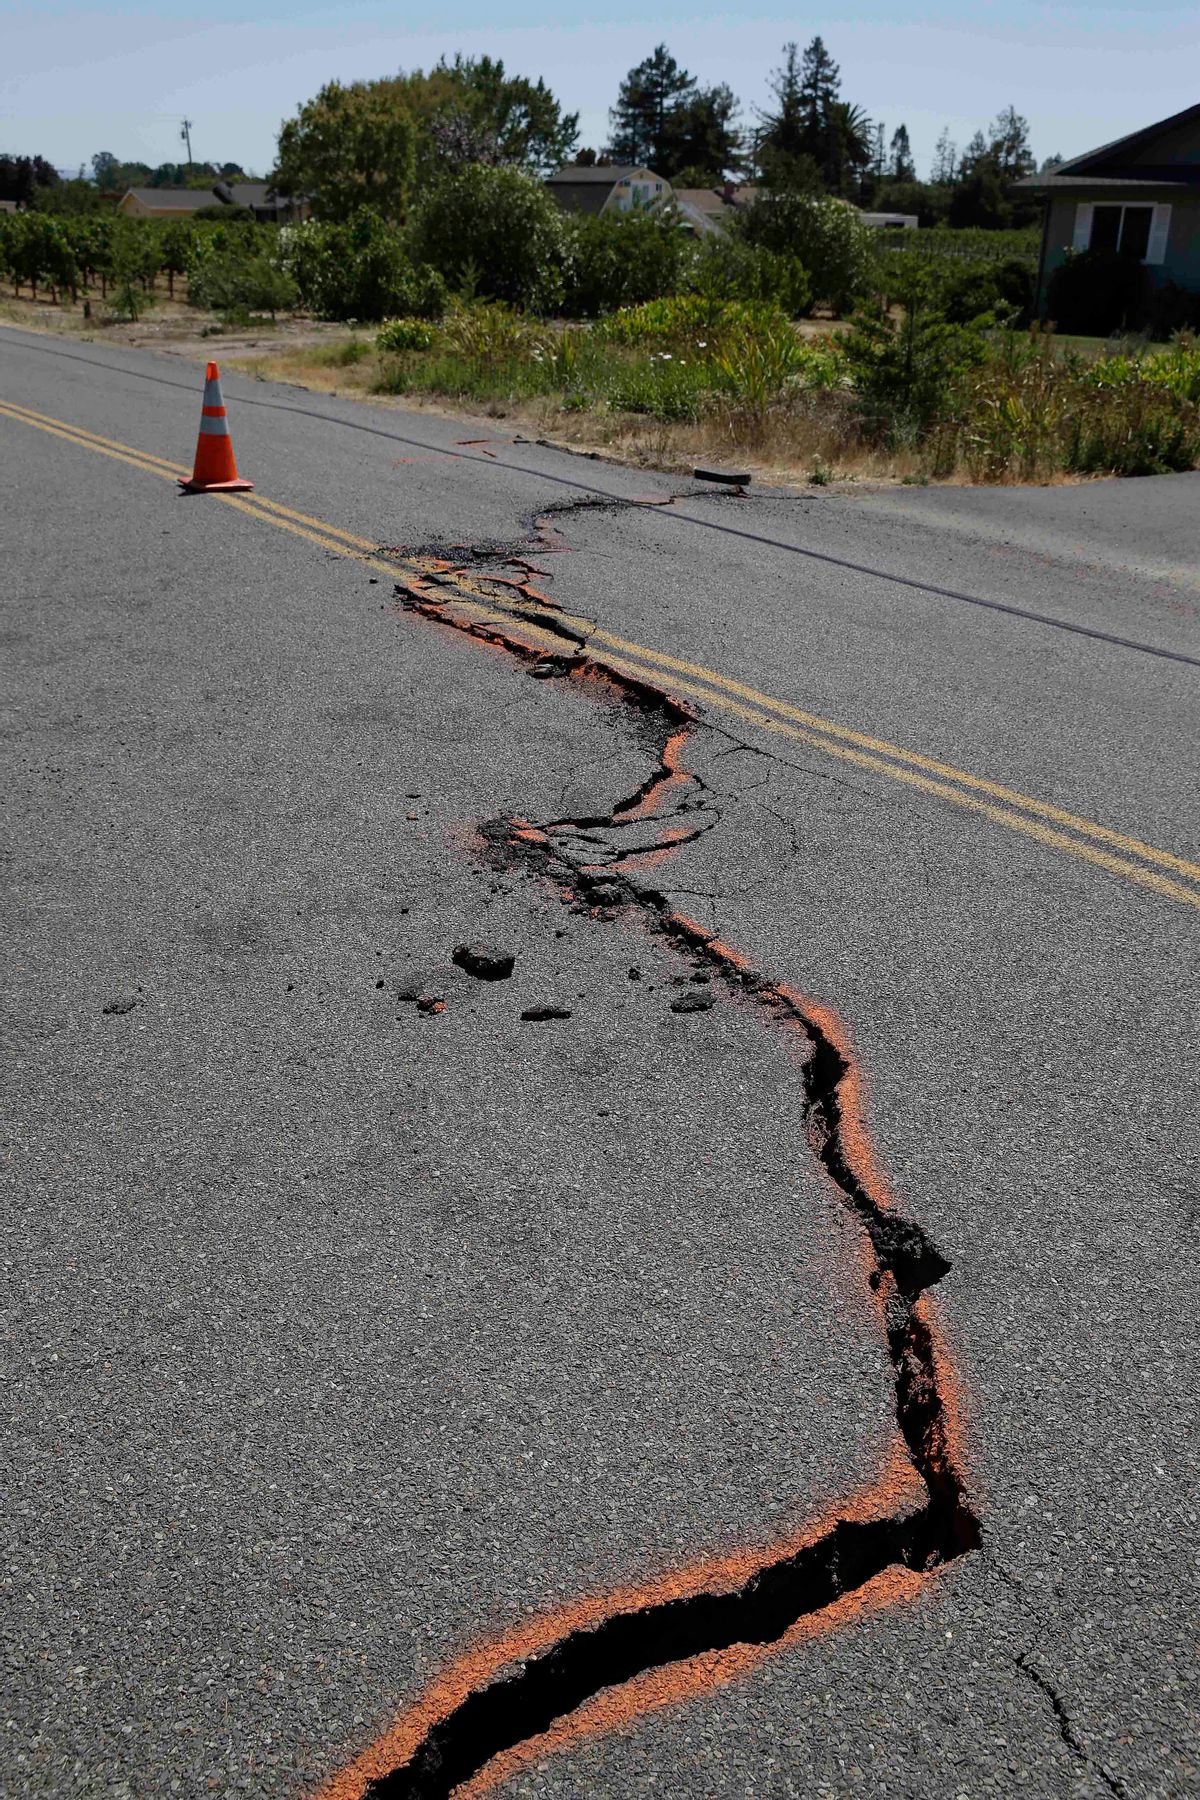 FILE - In this Aug. 24, 2014 file photo, a cracked section of roadway is shown in the Carneros district of Napa, Calif., following an earthquake. Emerging data on last months Northern California earthquake is explaining why the city of Napa suffered so much of the damage.  (AP Photo/Eric Risberg, File) (AP)